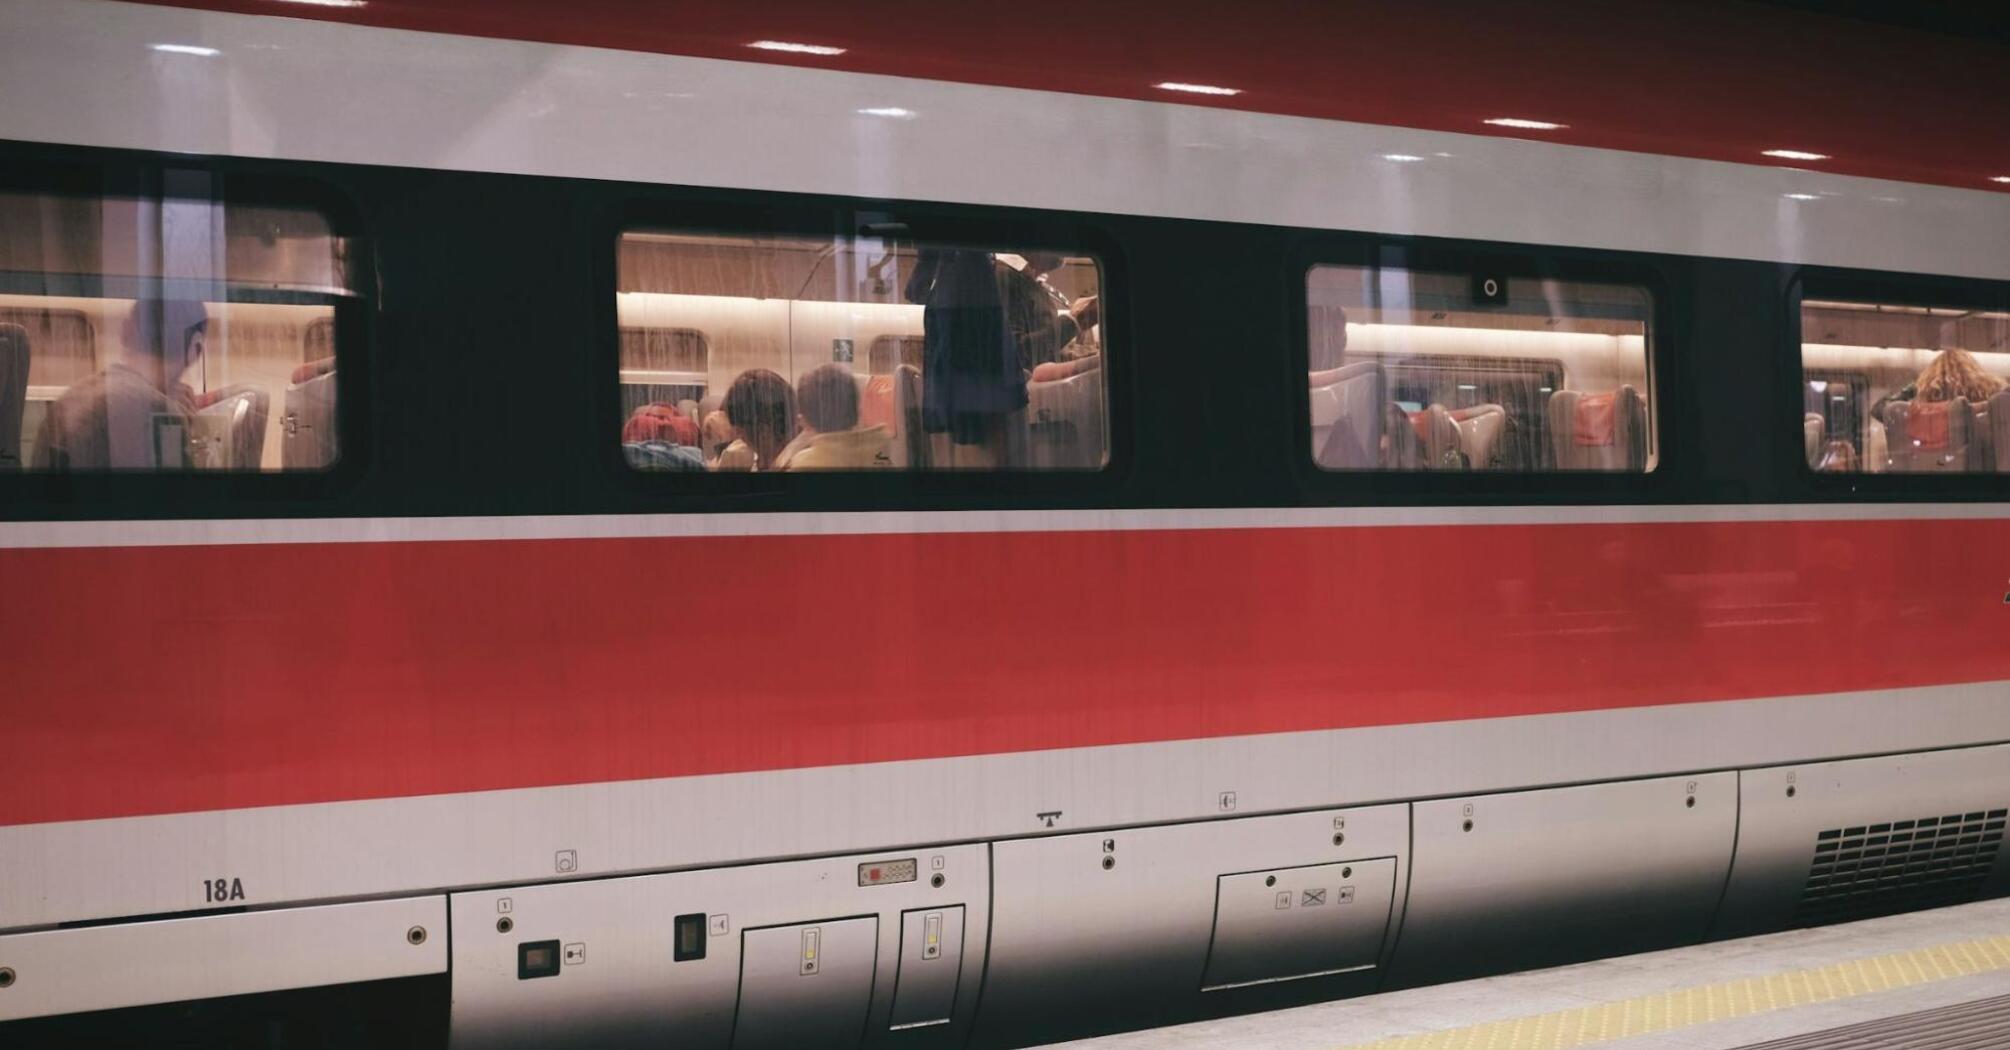 A high-speed train with passengers seated inside, visible through the windows, at a platform